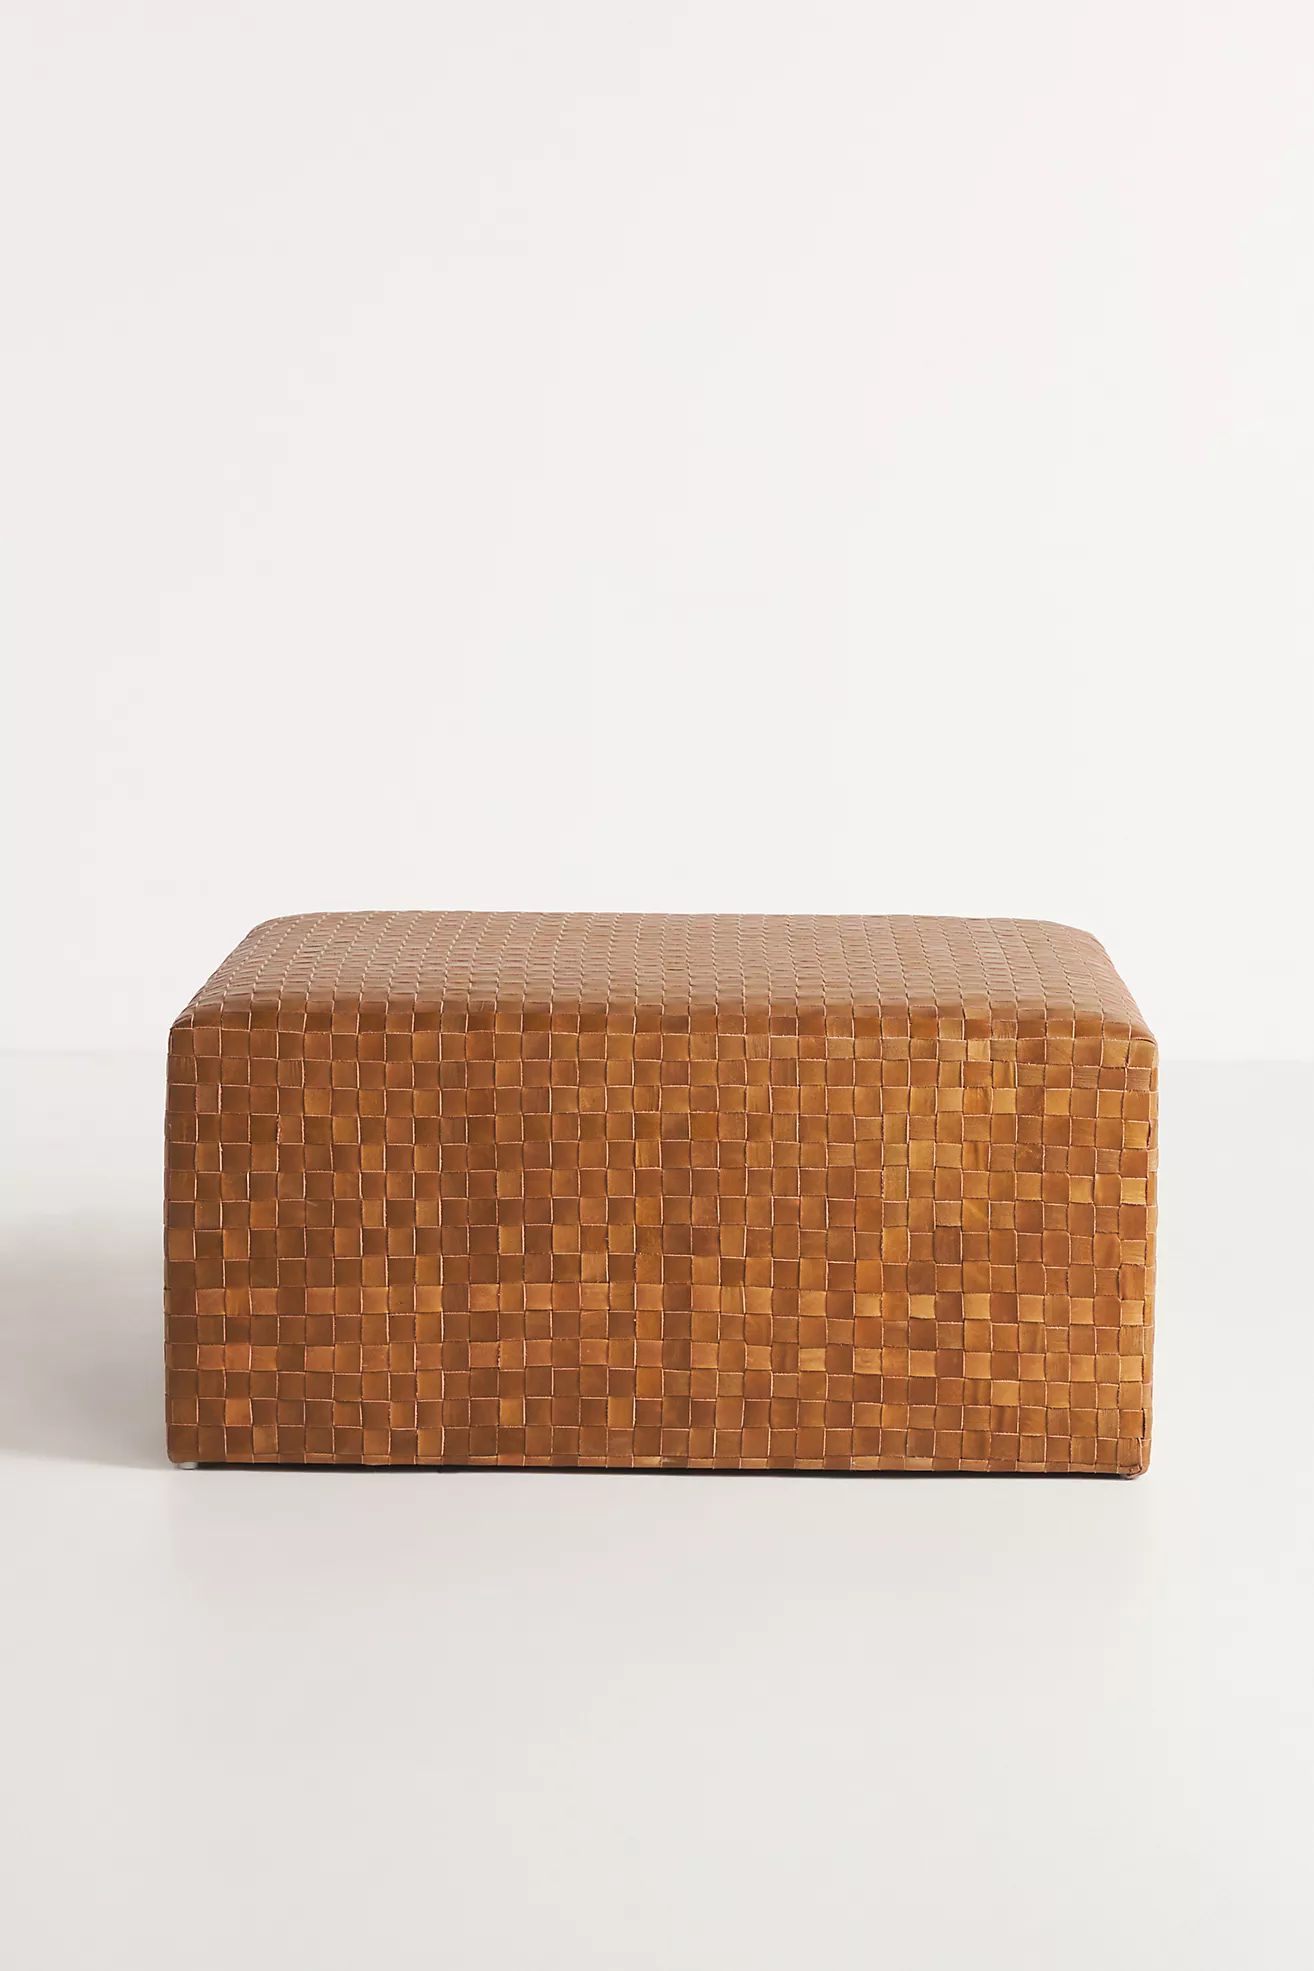 Cove Woven Leather Ottoman | Anthropologie (US)